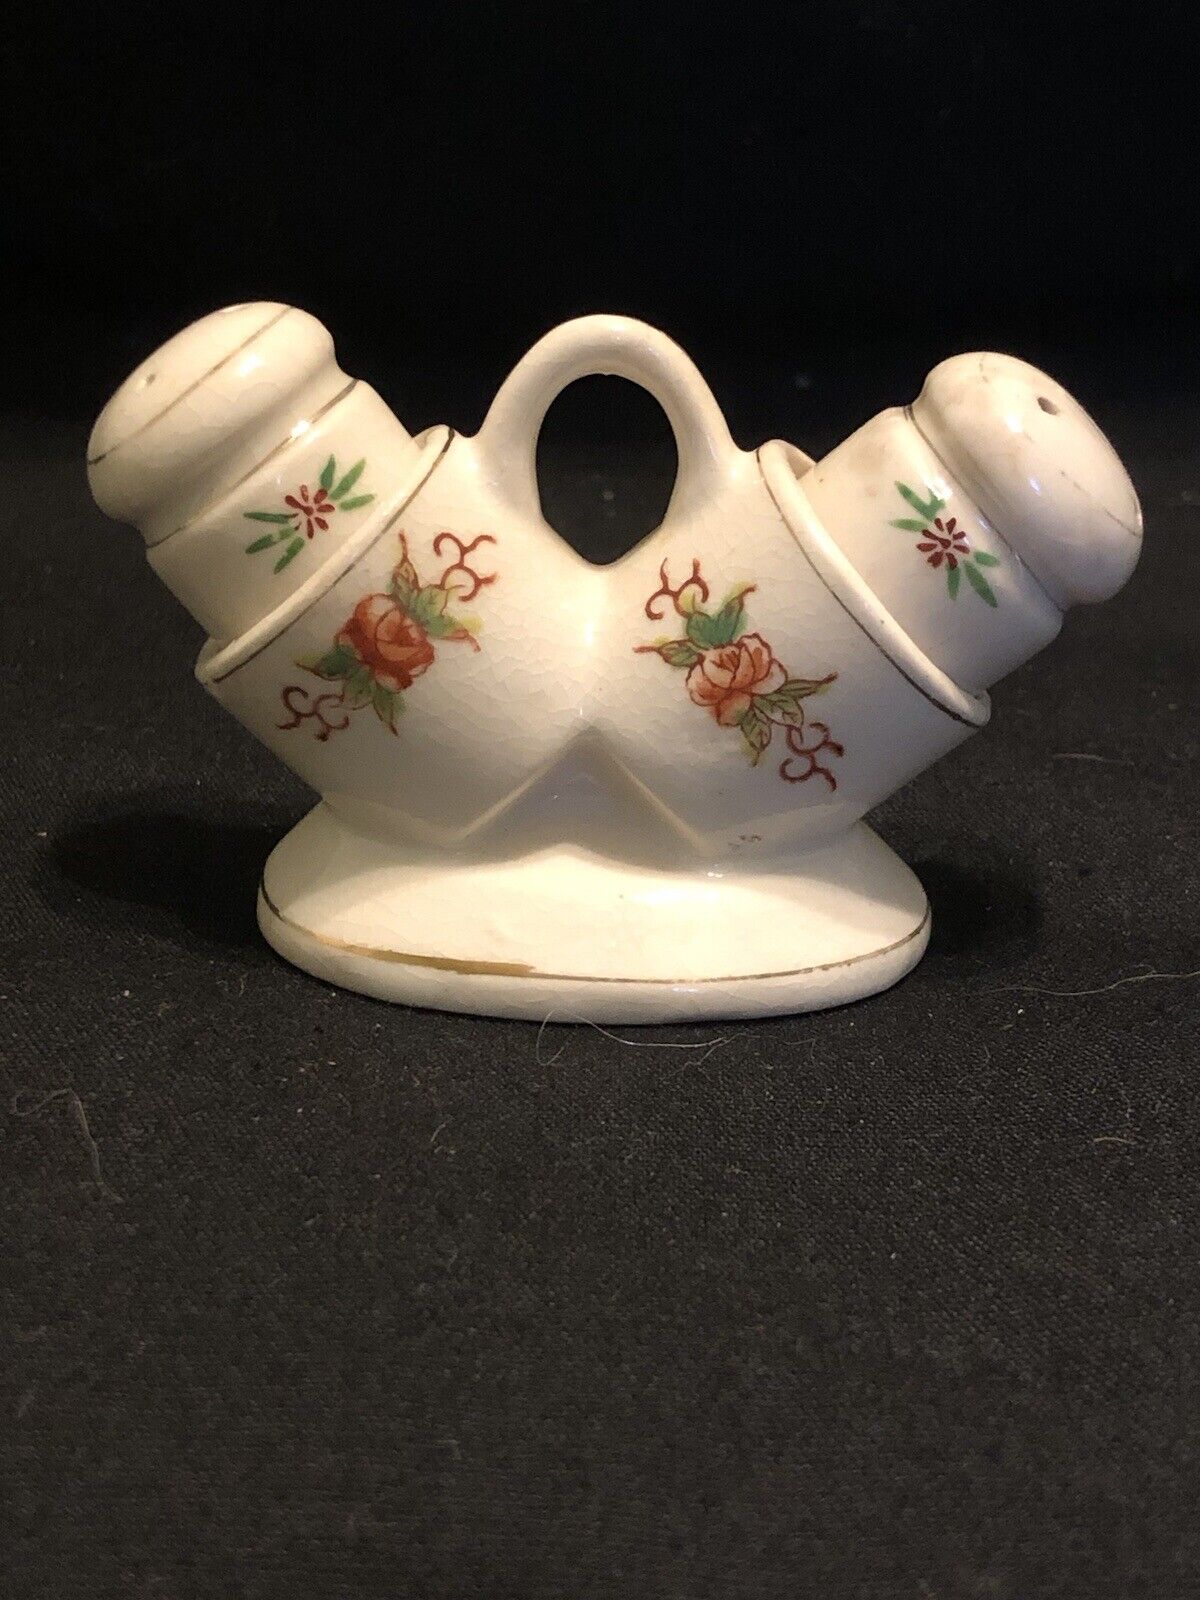 Vintage Porcelain Made in Occupied Japan Salt And Pepper Shakers& Matching Caddy